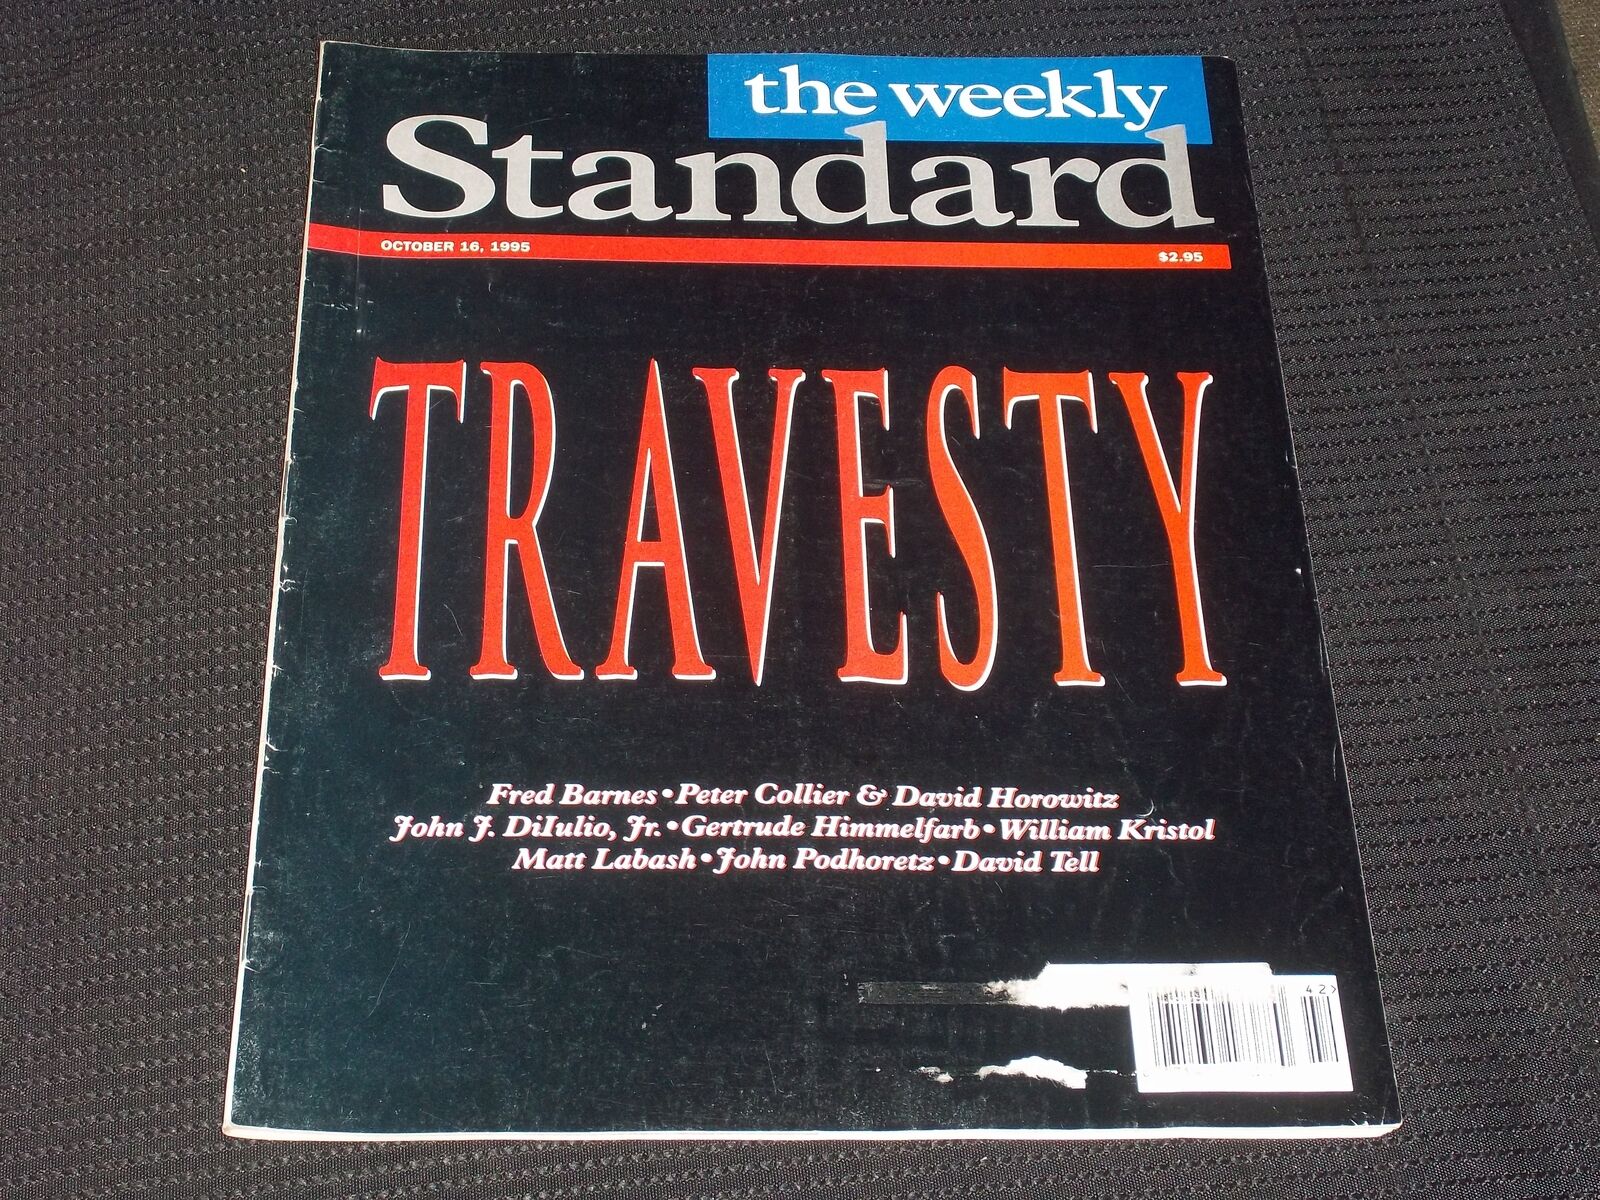 1995 OCTOBER 16 THE WEEKLY STANDARD MAGAZINE - TRAVESTY FRONT COVER - E 276